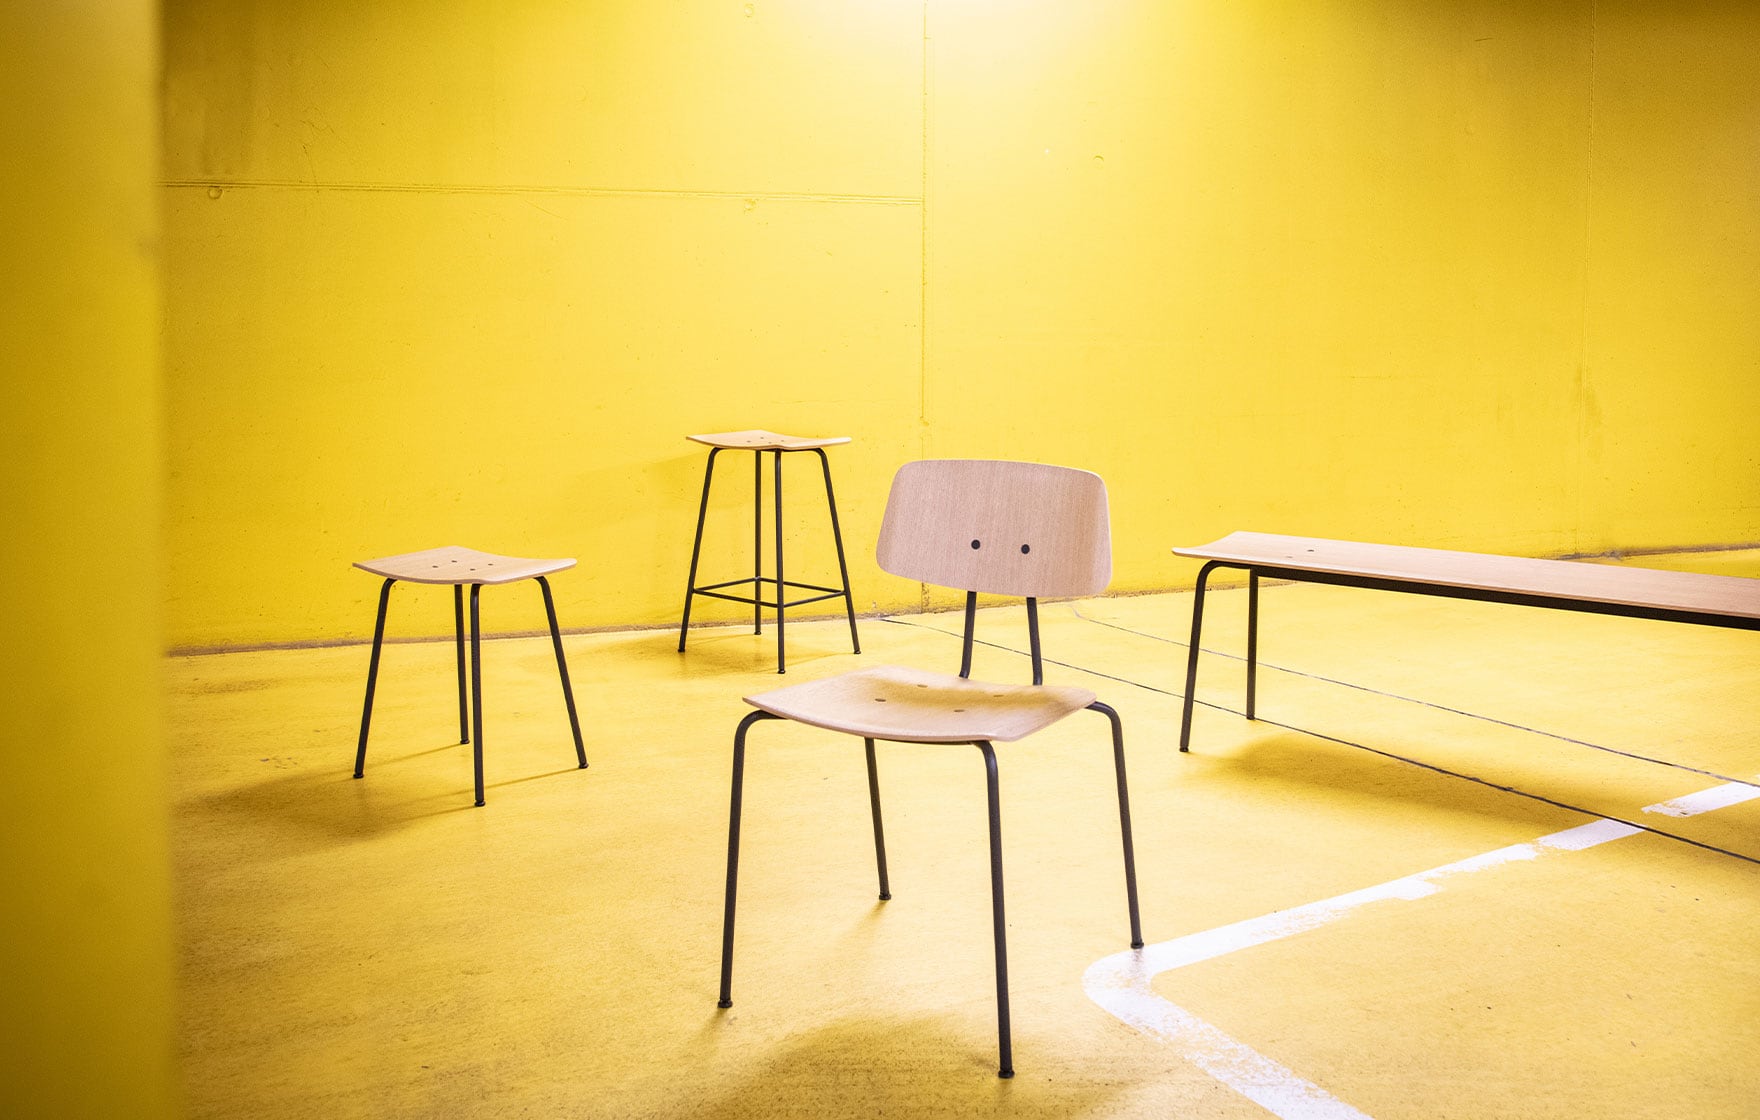 A group of Ocee and Four design office furniture including chairs and a bench in a room with yellow walls.